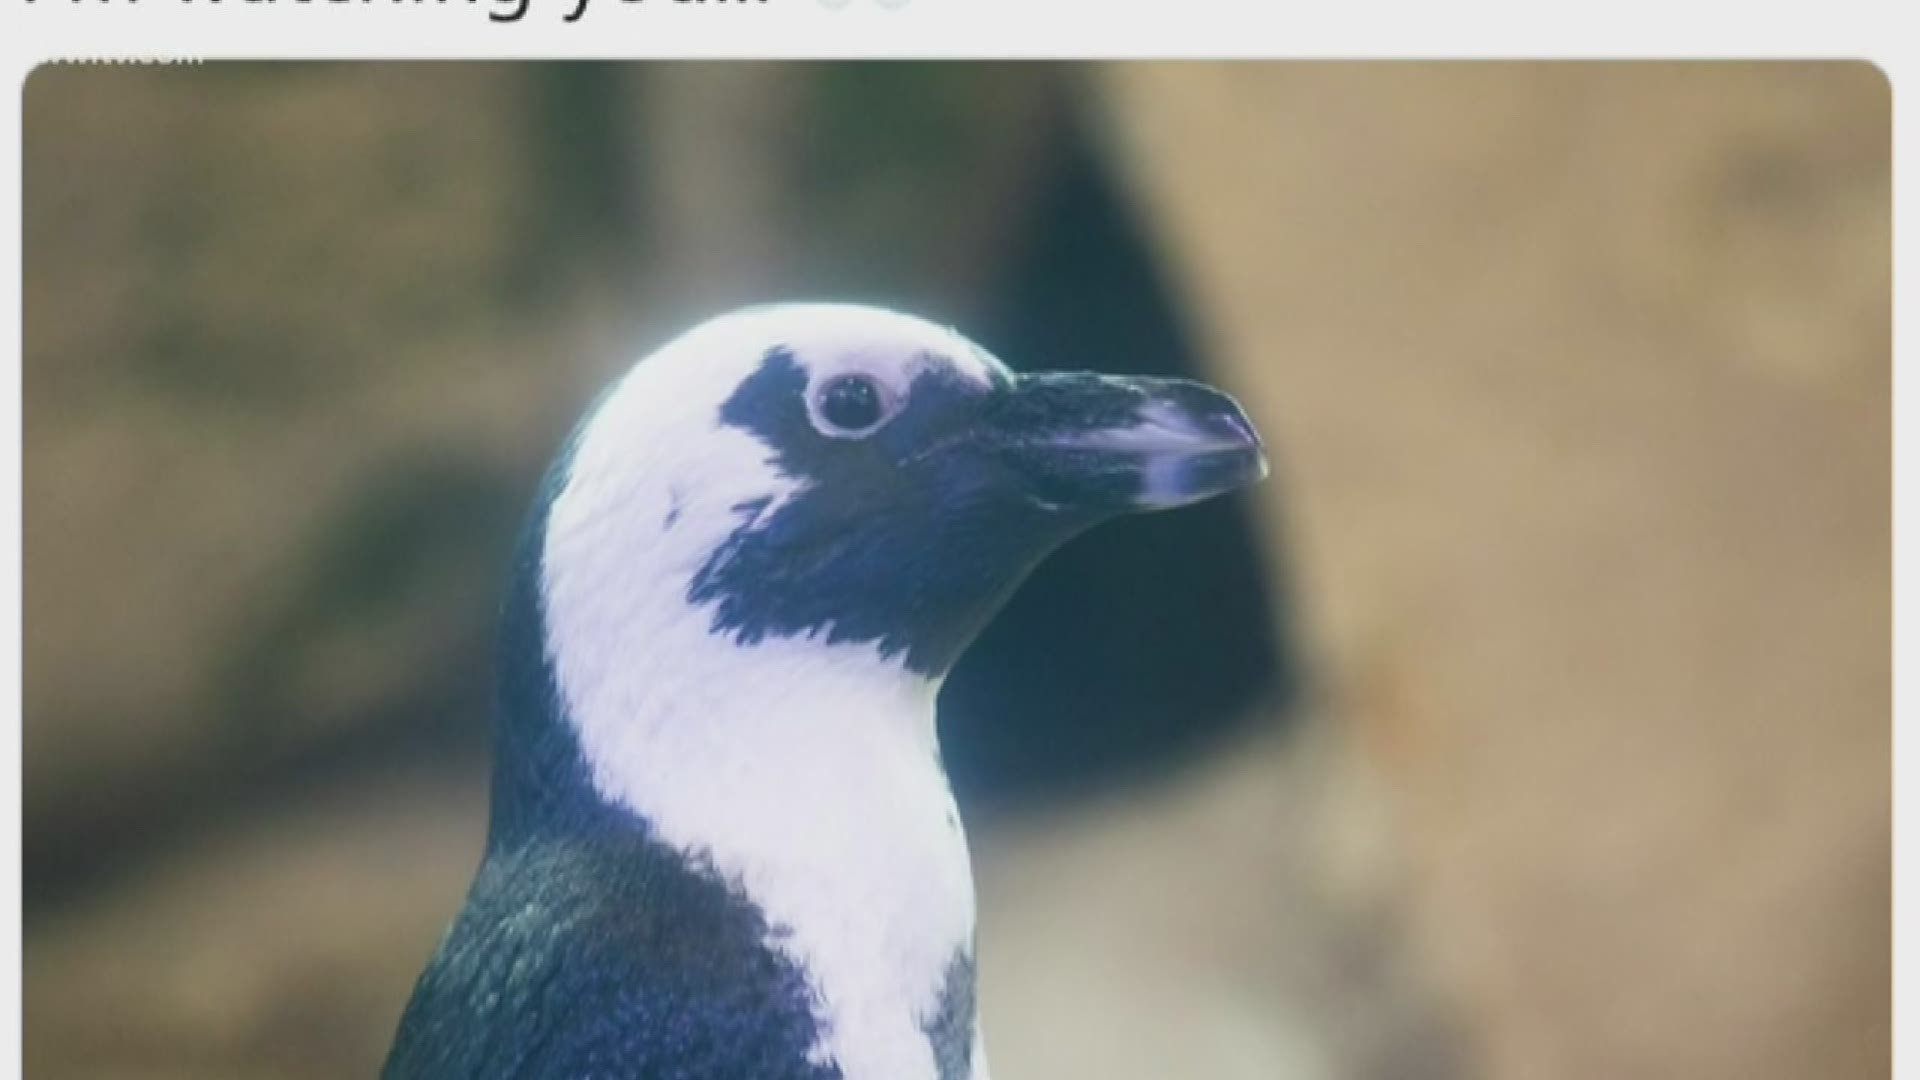 Elmyr is a 4-year-old African penguin with one massive following on Twitter.